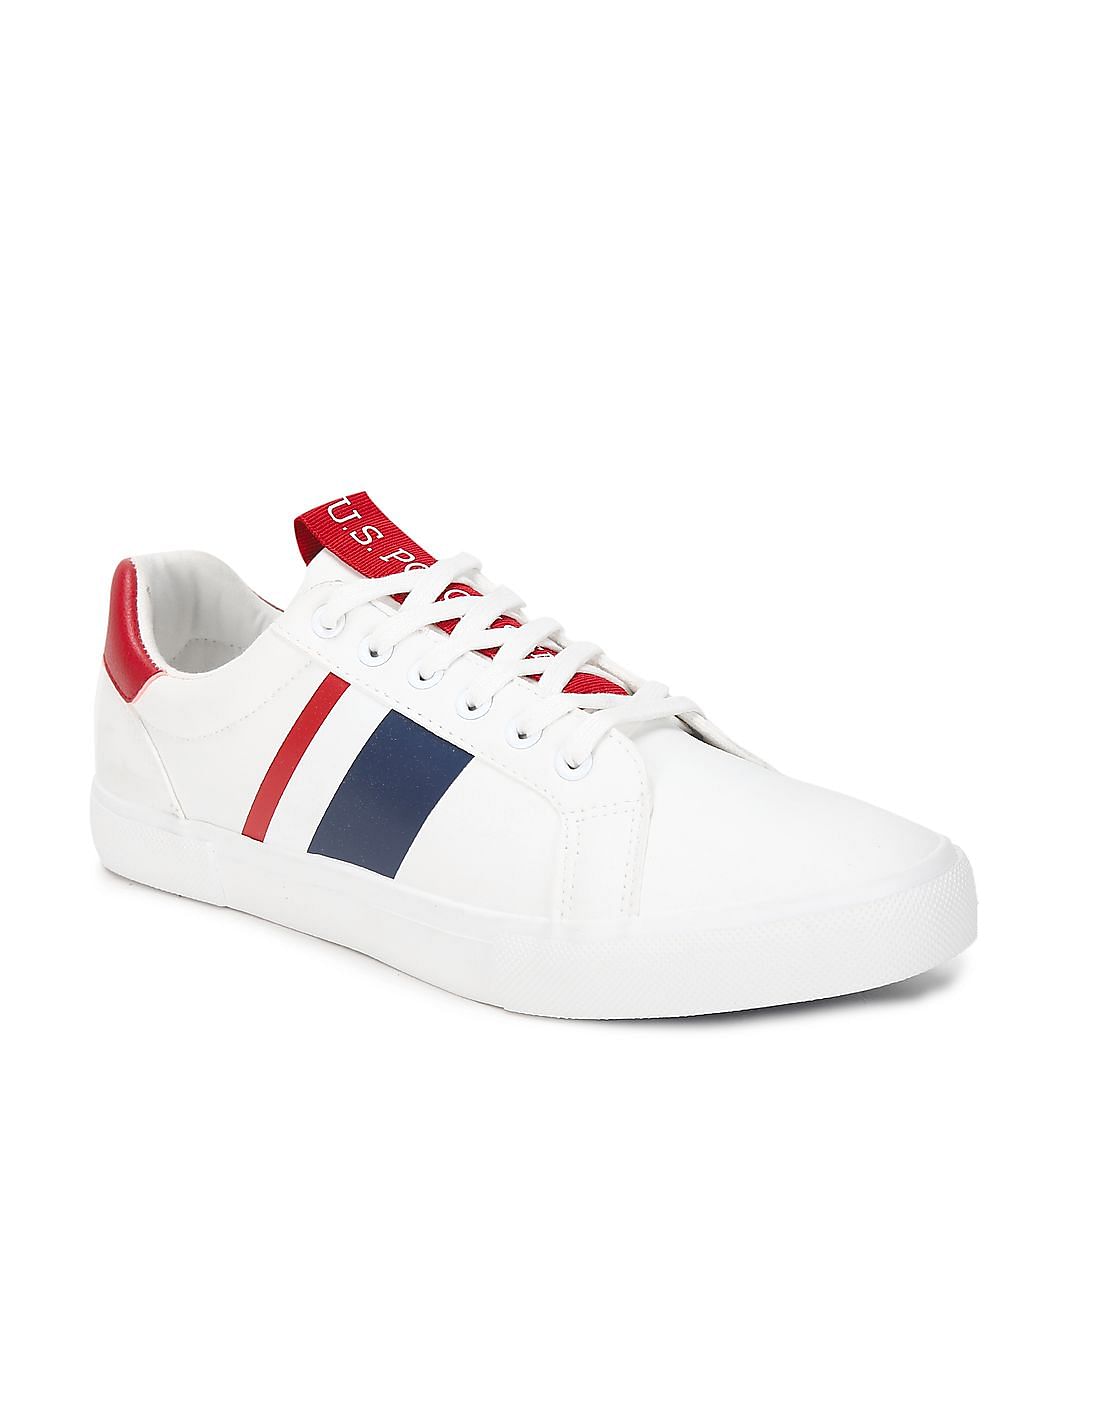 Buy U.S. Polo Assn. Men Round Toe Lace Up Santos Sneakers - NNNOW.com